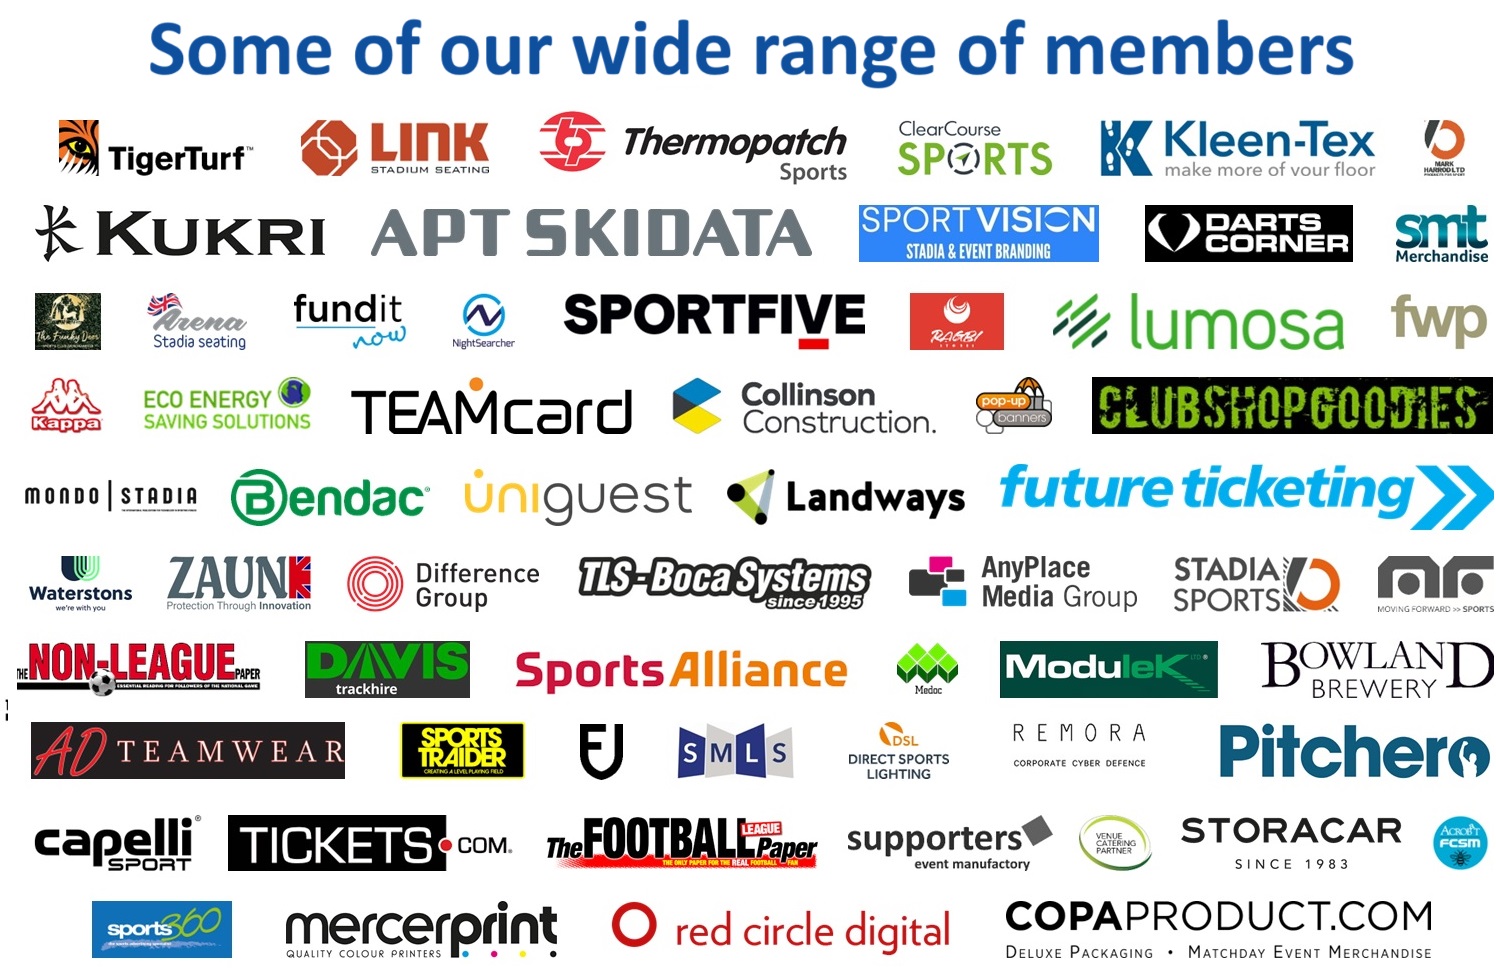 members-graphic-aug-23-with-title